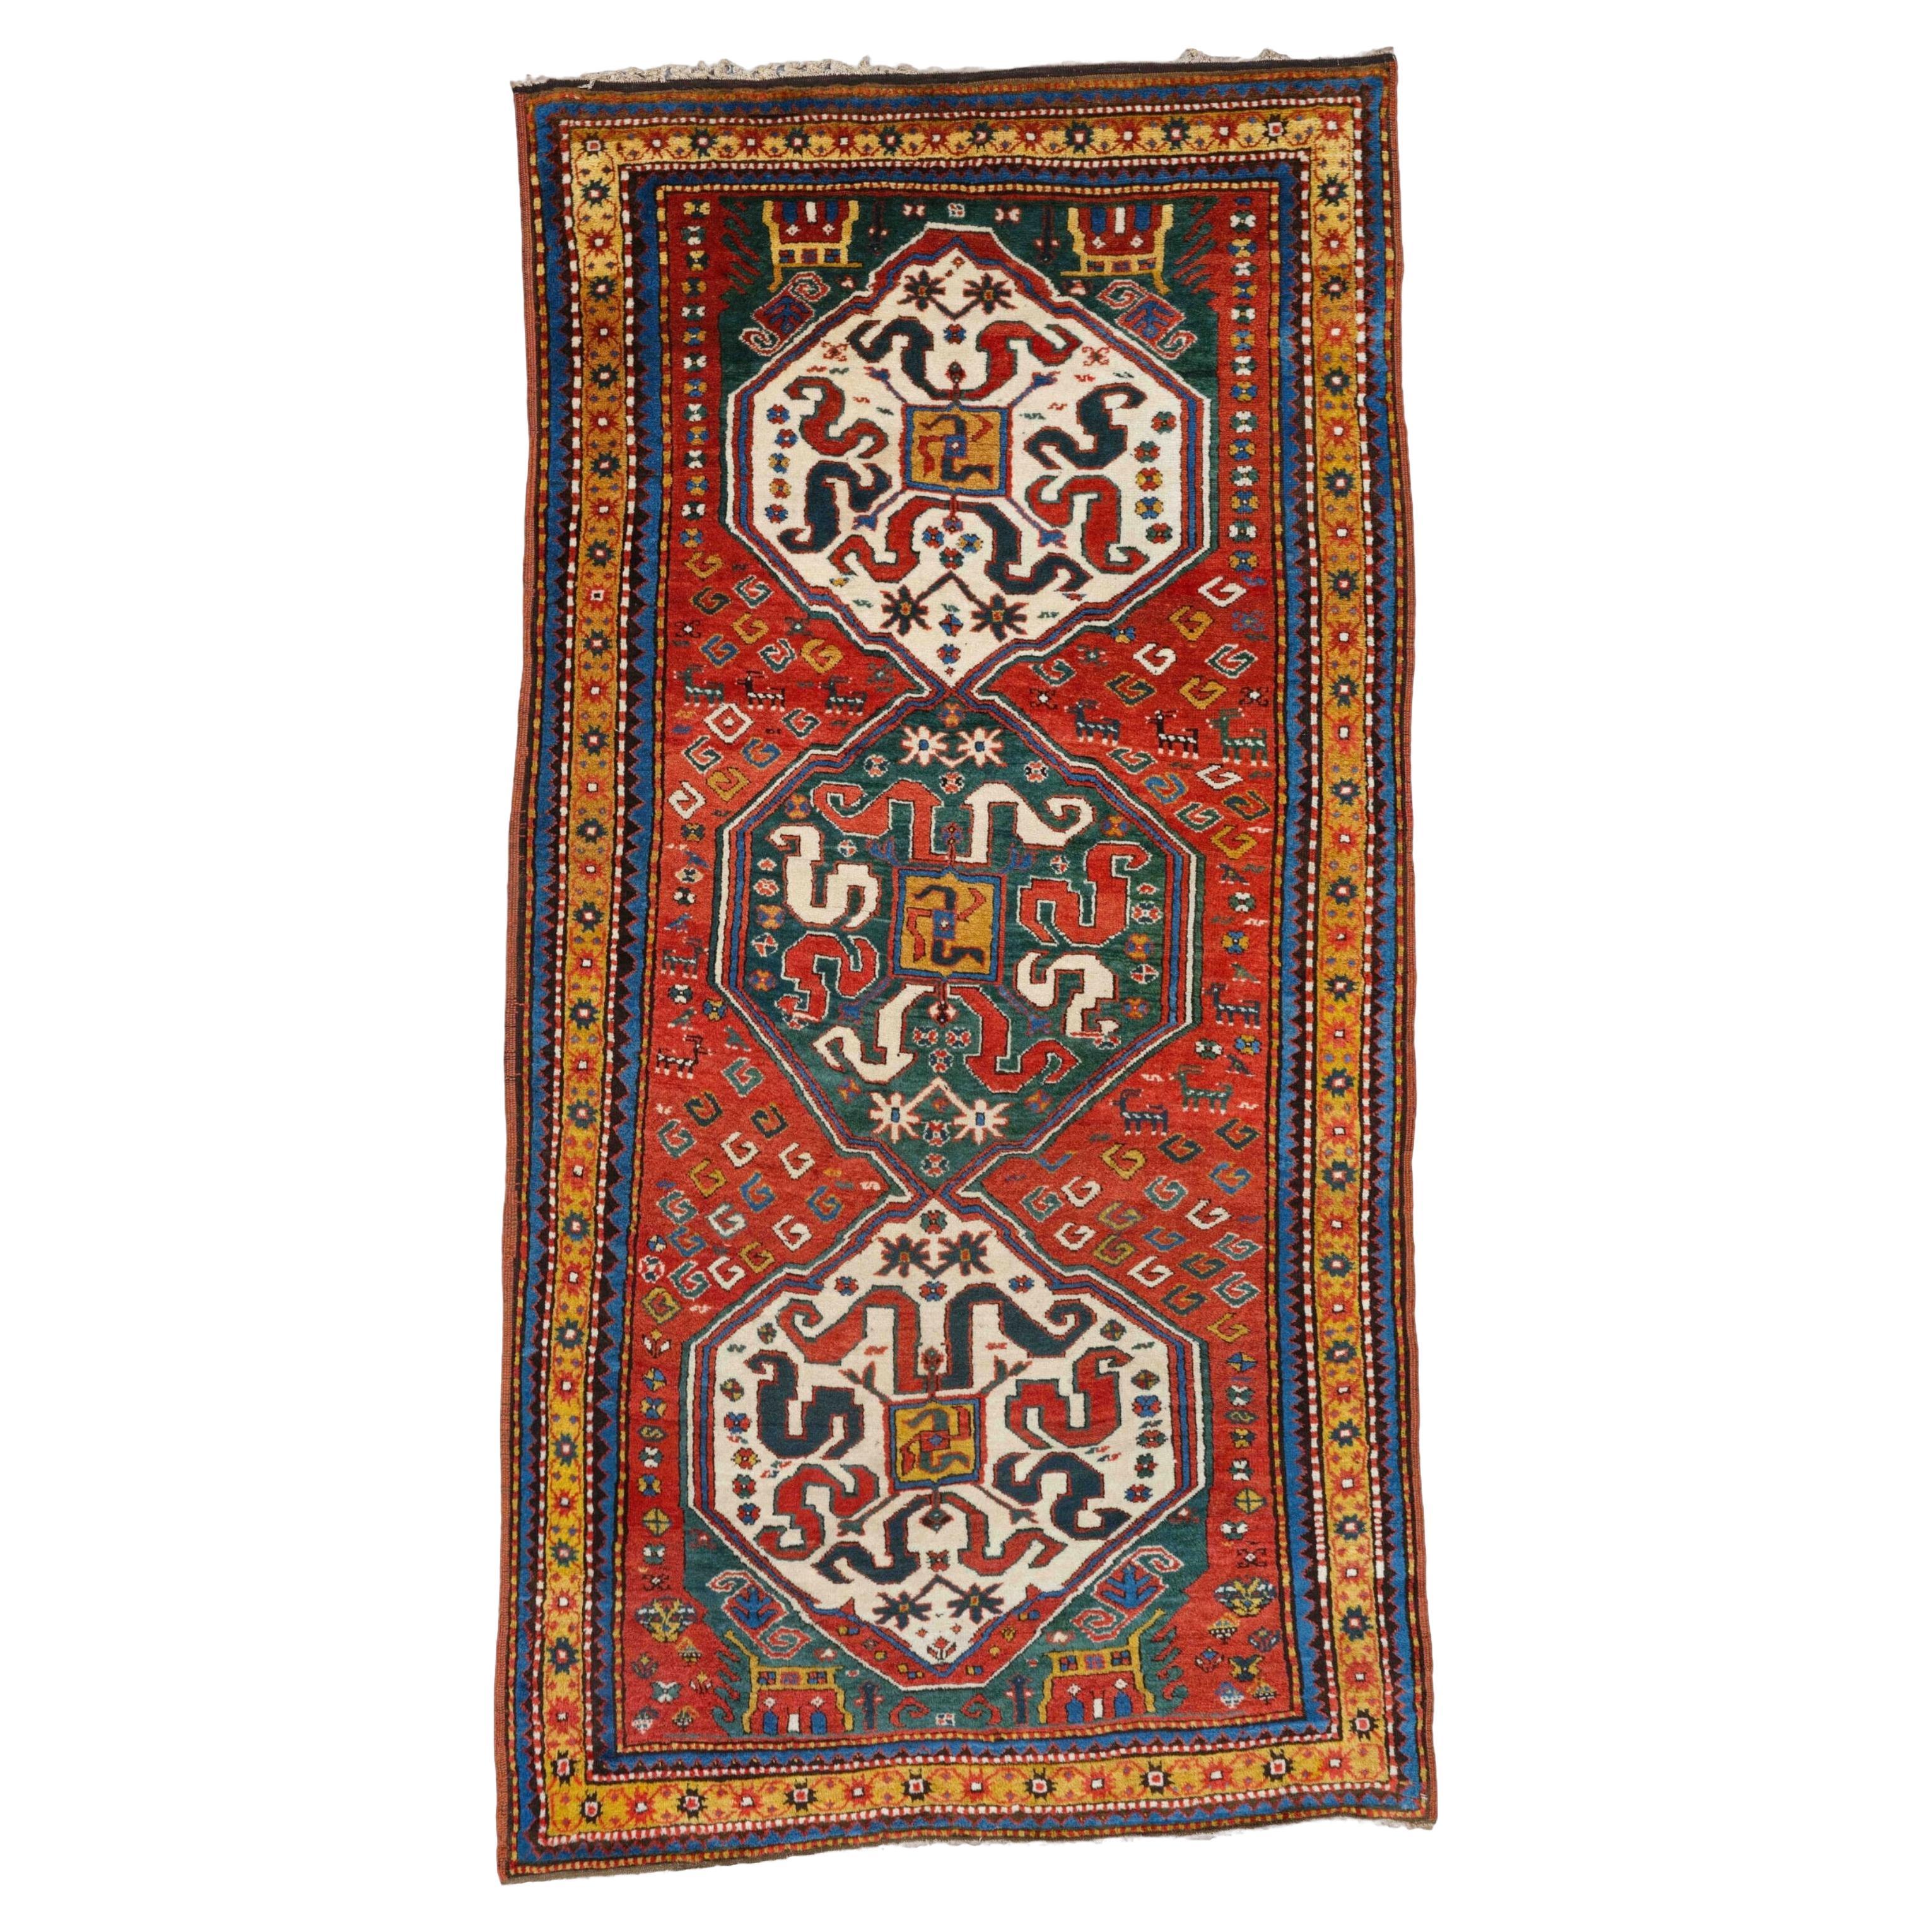 Antique Chondzoresk Rug - Middle of 19th Century Caucasian Chondzoresk Rug